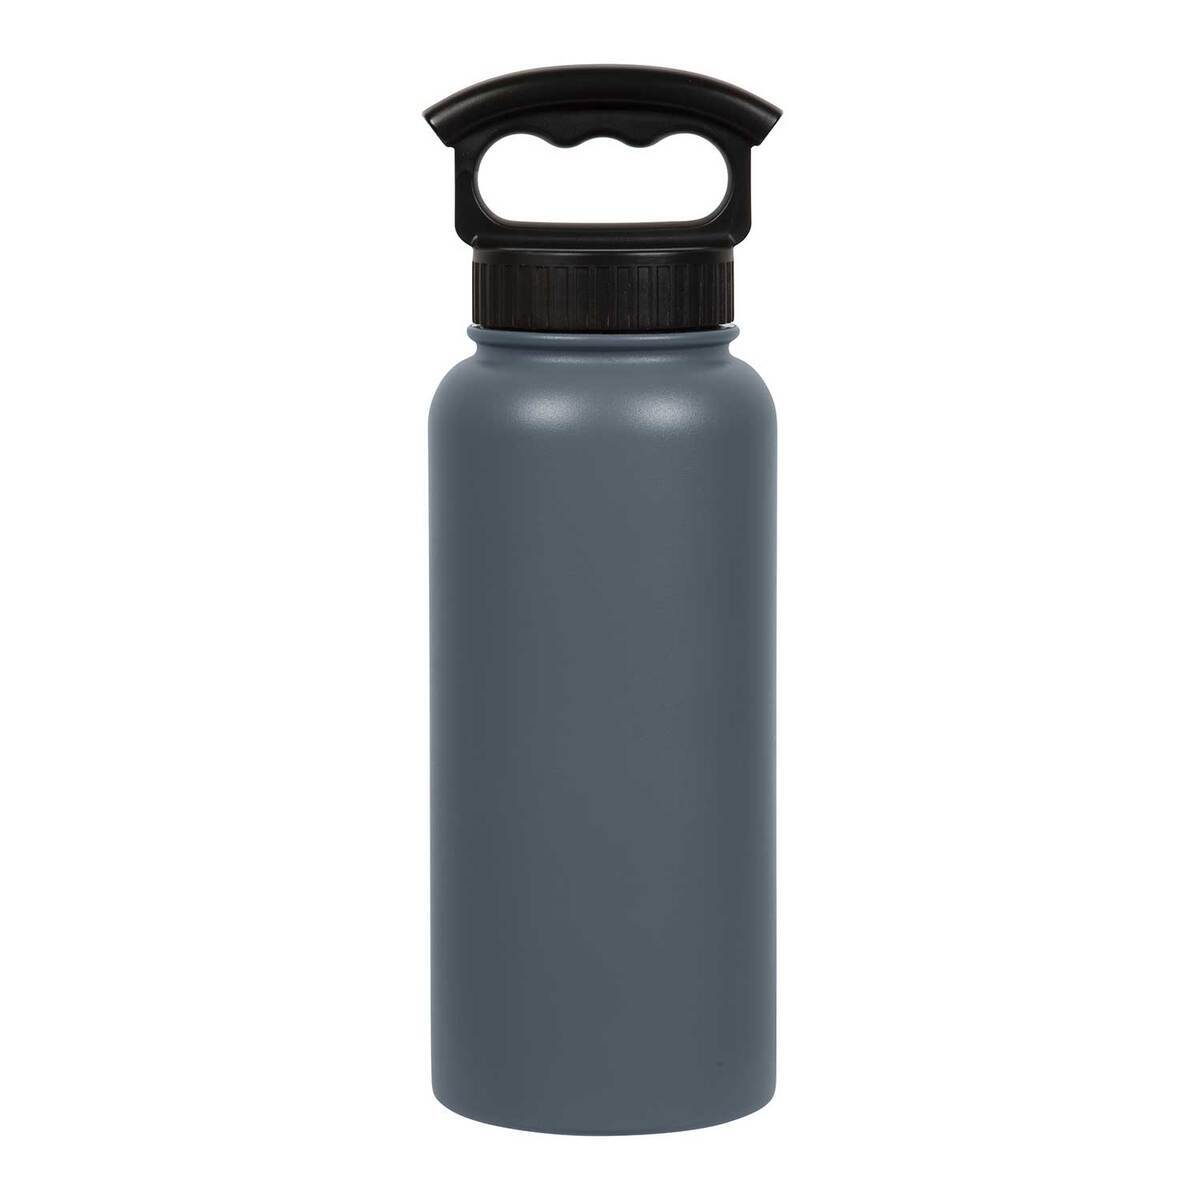 Fifty/Fifty 32oz Wide Mouth Insulated Bottle with 3 Finger Grip Cap - Navy Blue 3.5in x 3.5in x 10.25in by Sportsman's Warehouse